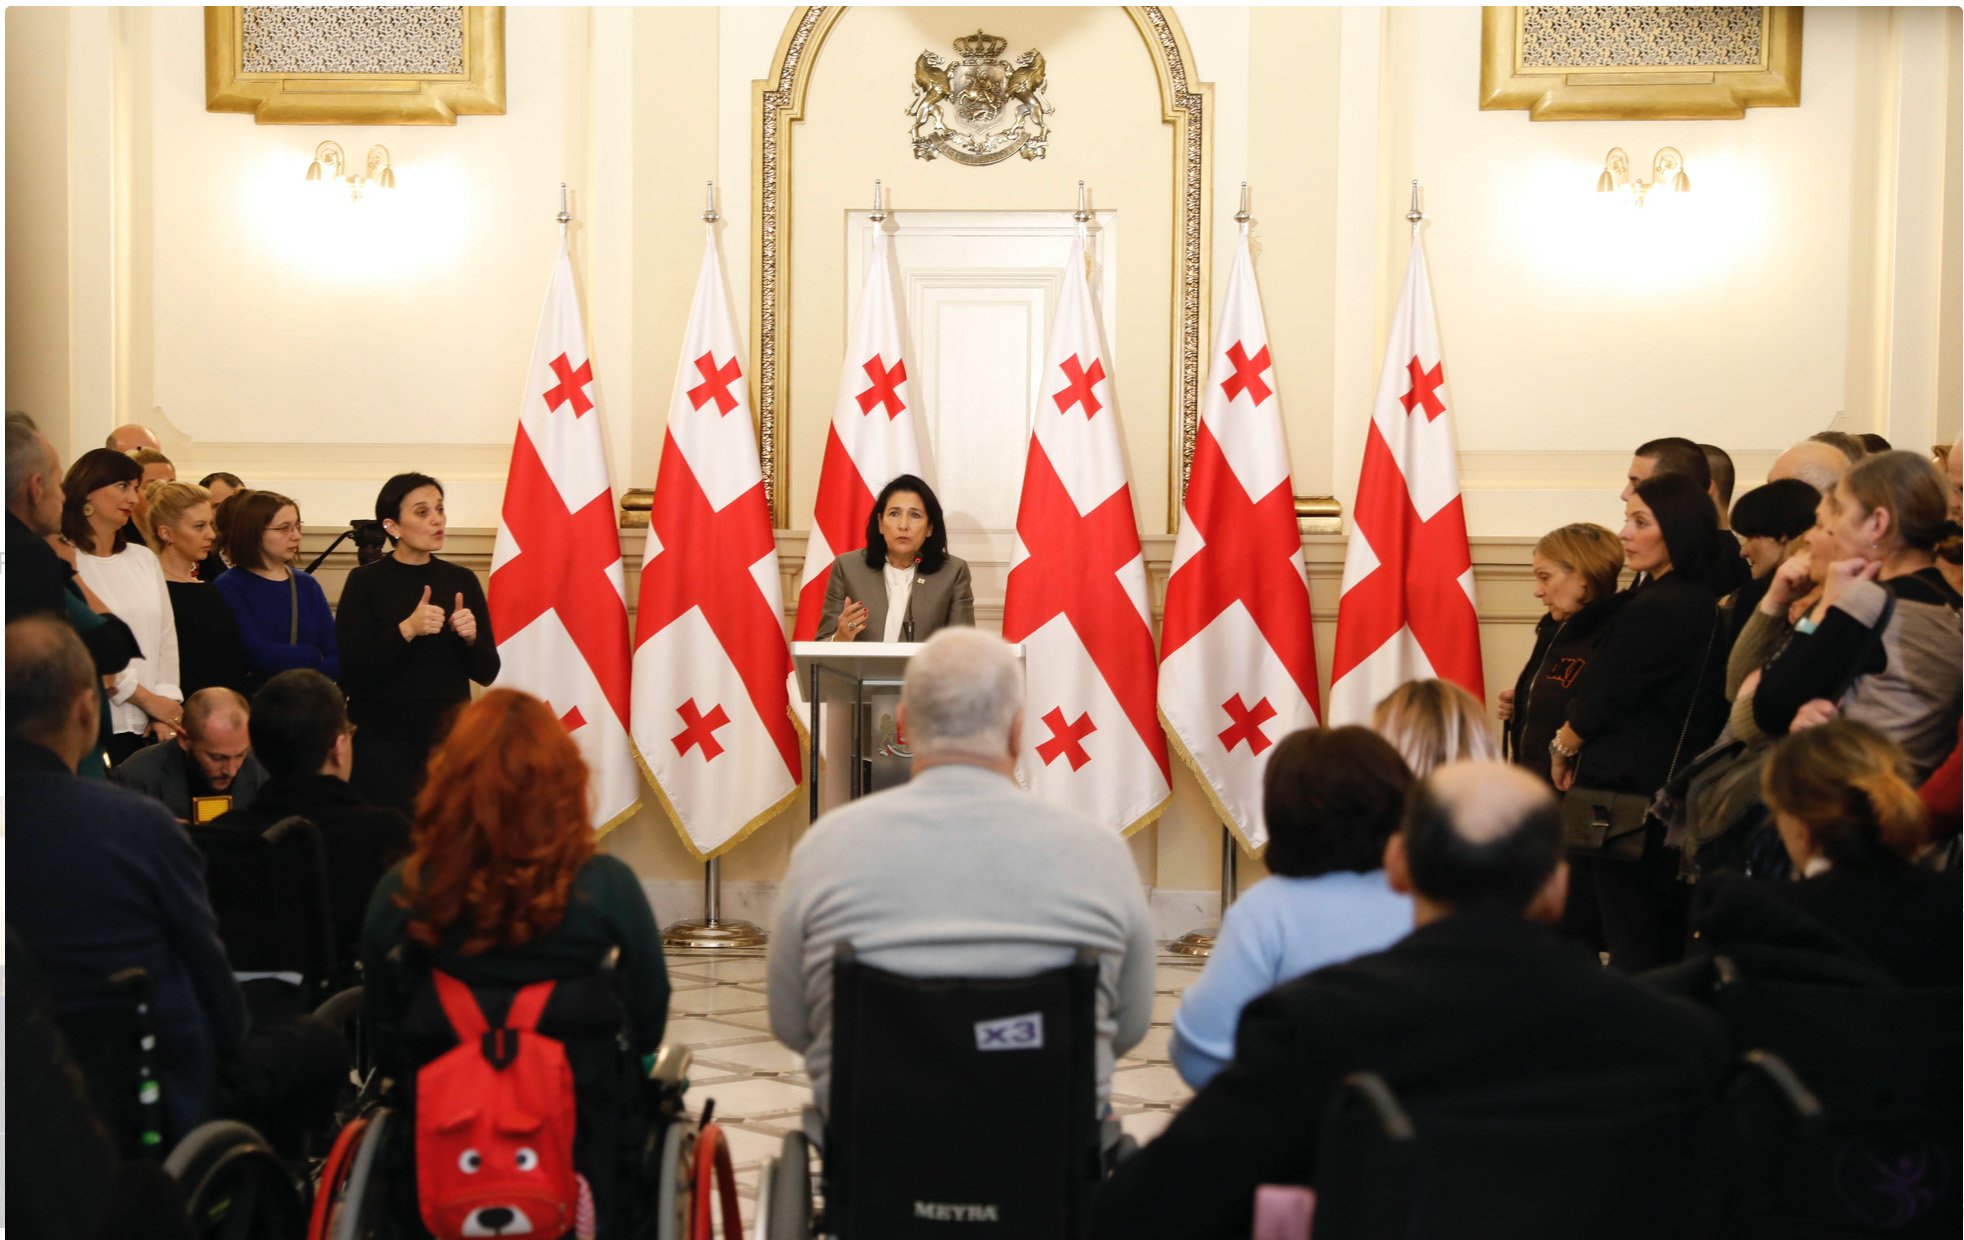 Public event presided over in January by Salome Zurabishvili at the Georgian presidential palace [Presidency of Georgia].